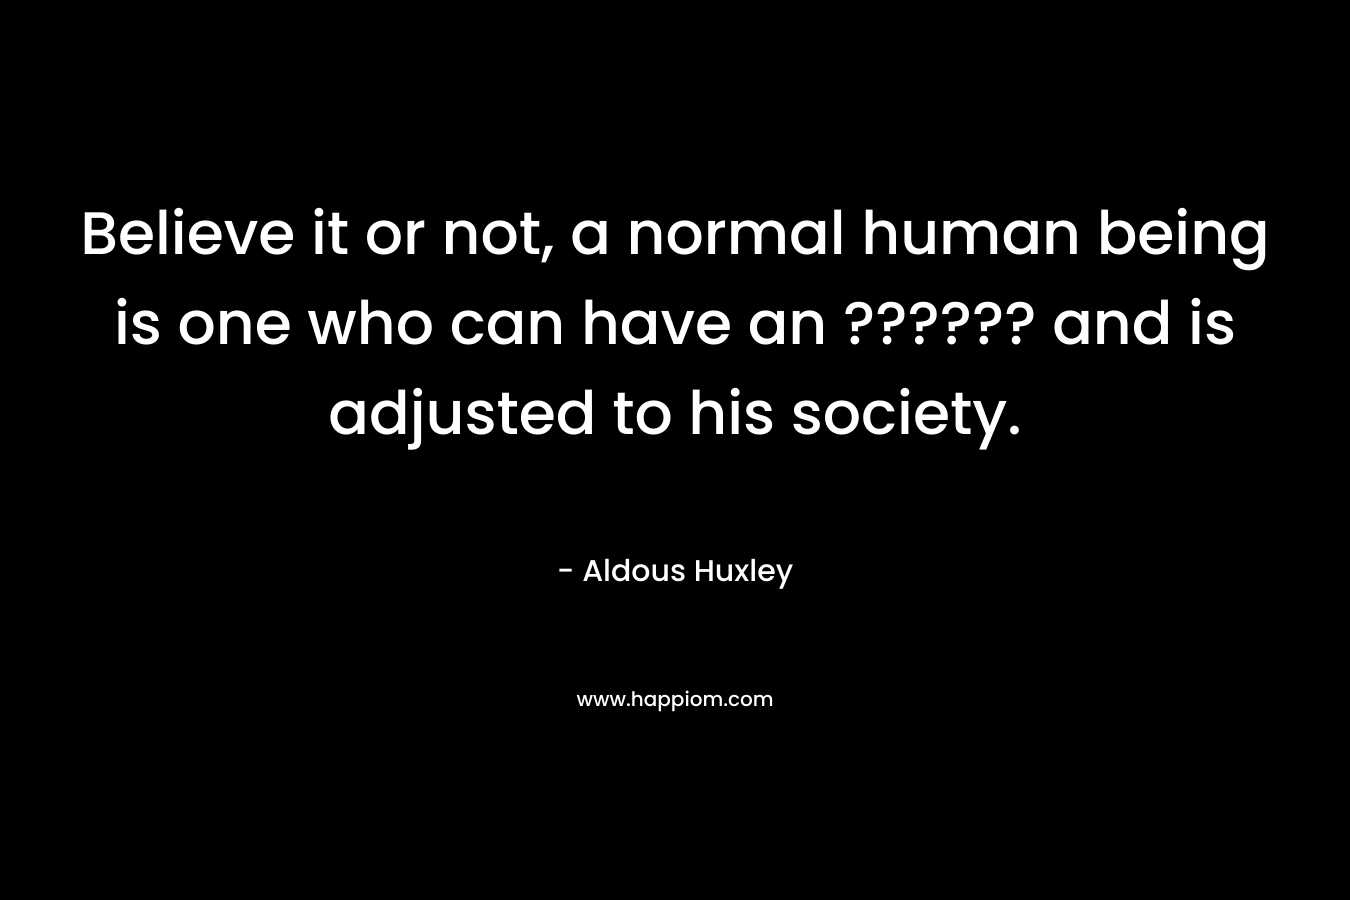 Believe it or not, a normal human being is one who can have an ?????? and is adjusted to his society. – Aldous Huxley